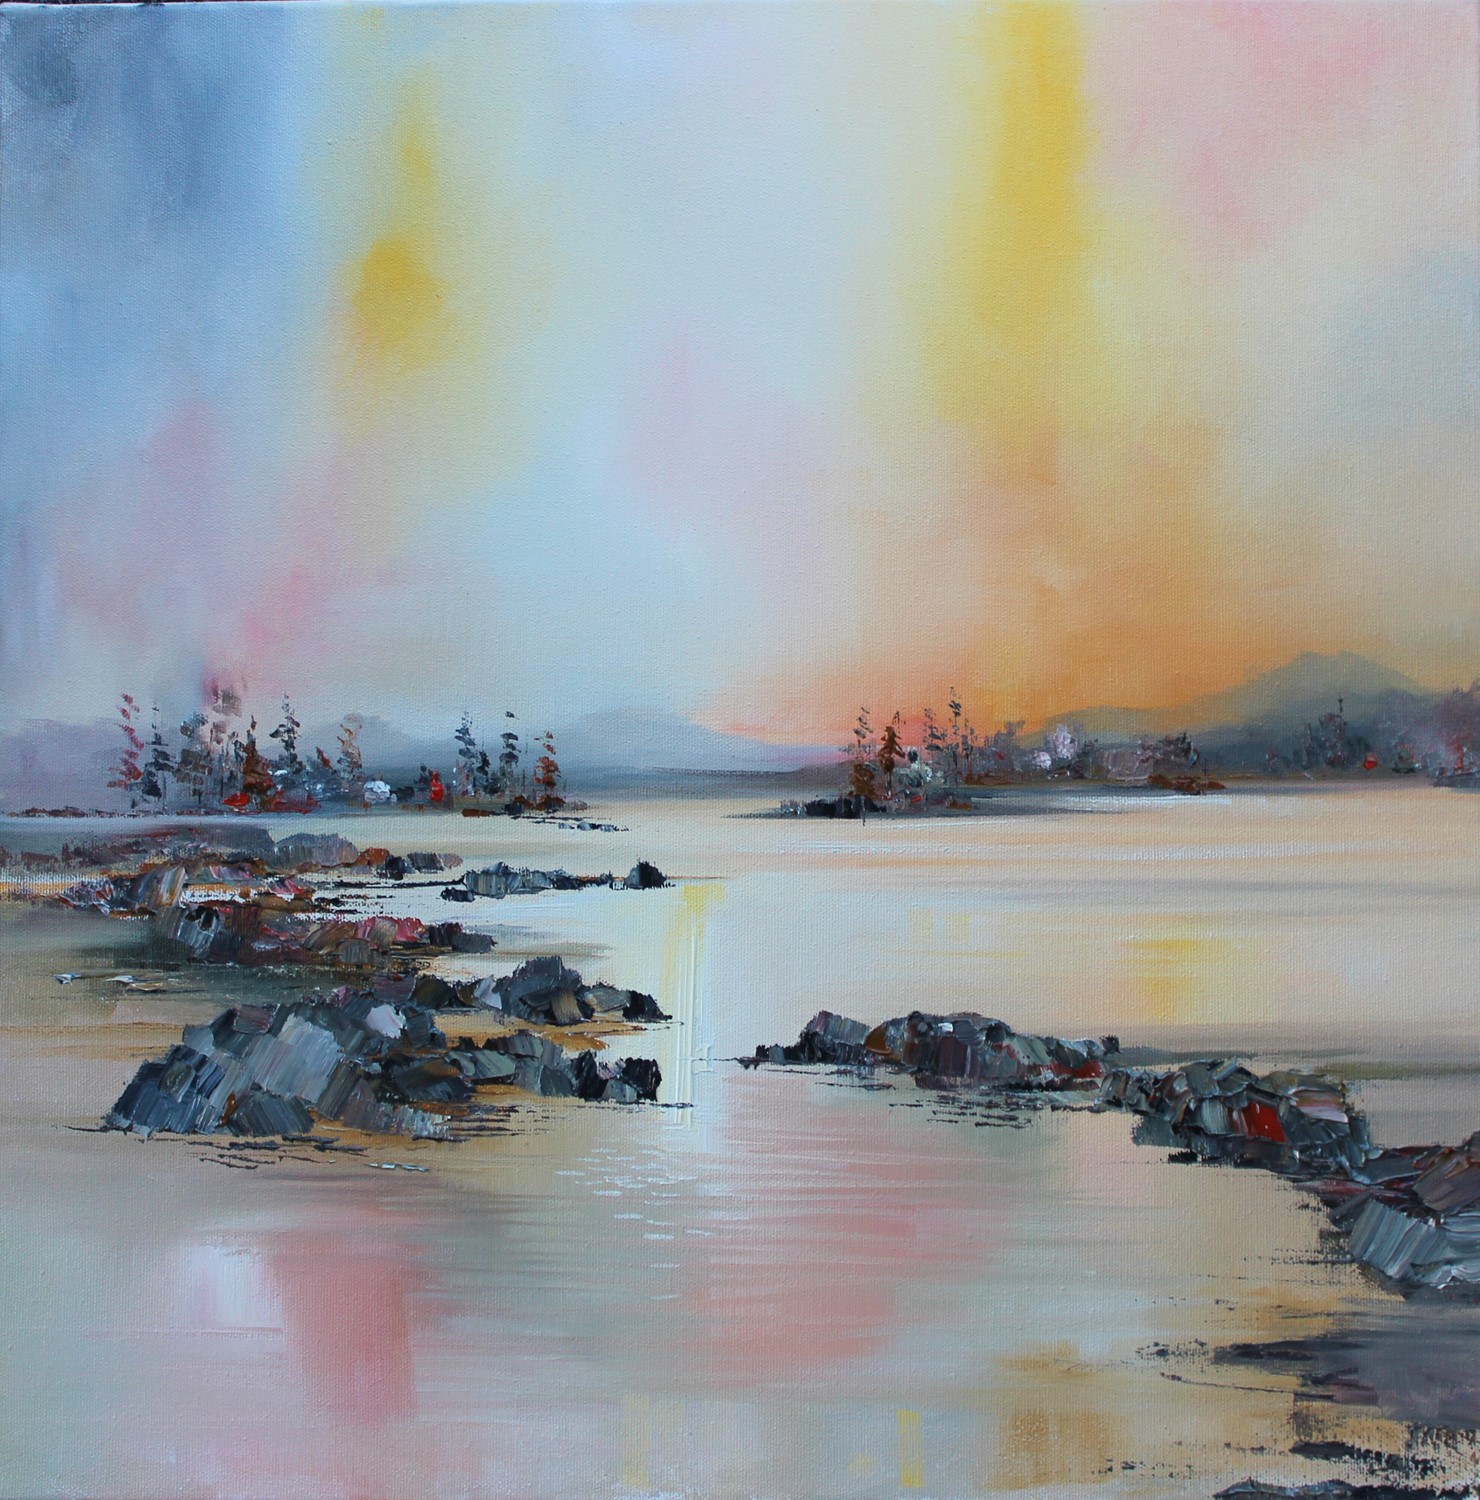 'Still moment by the Loch' by artist Rosanne Barr